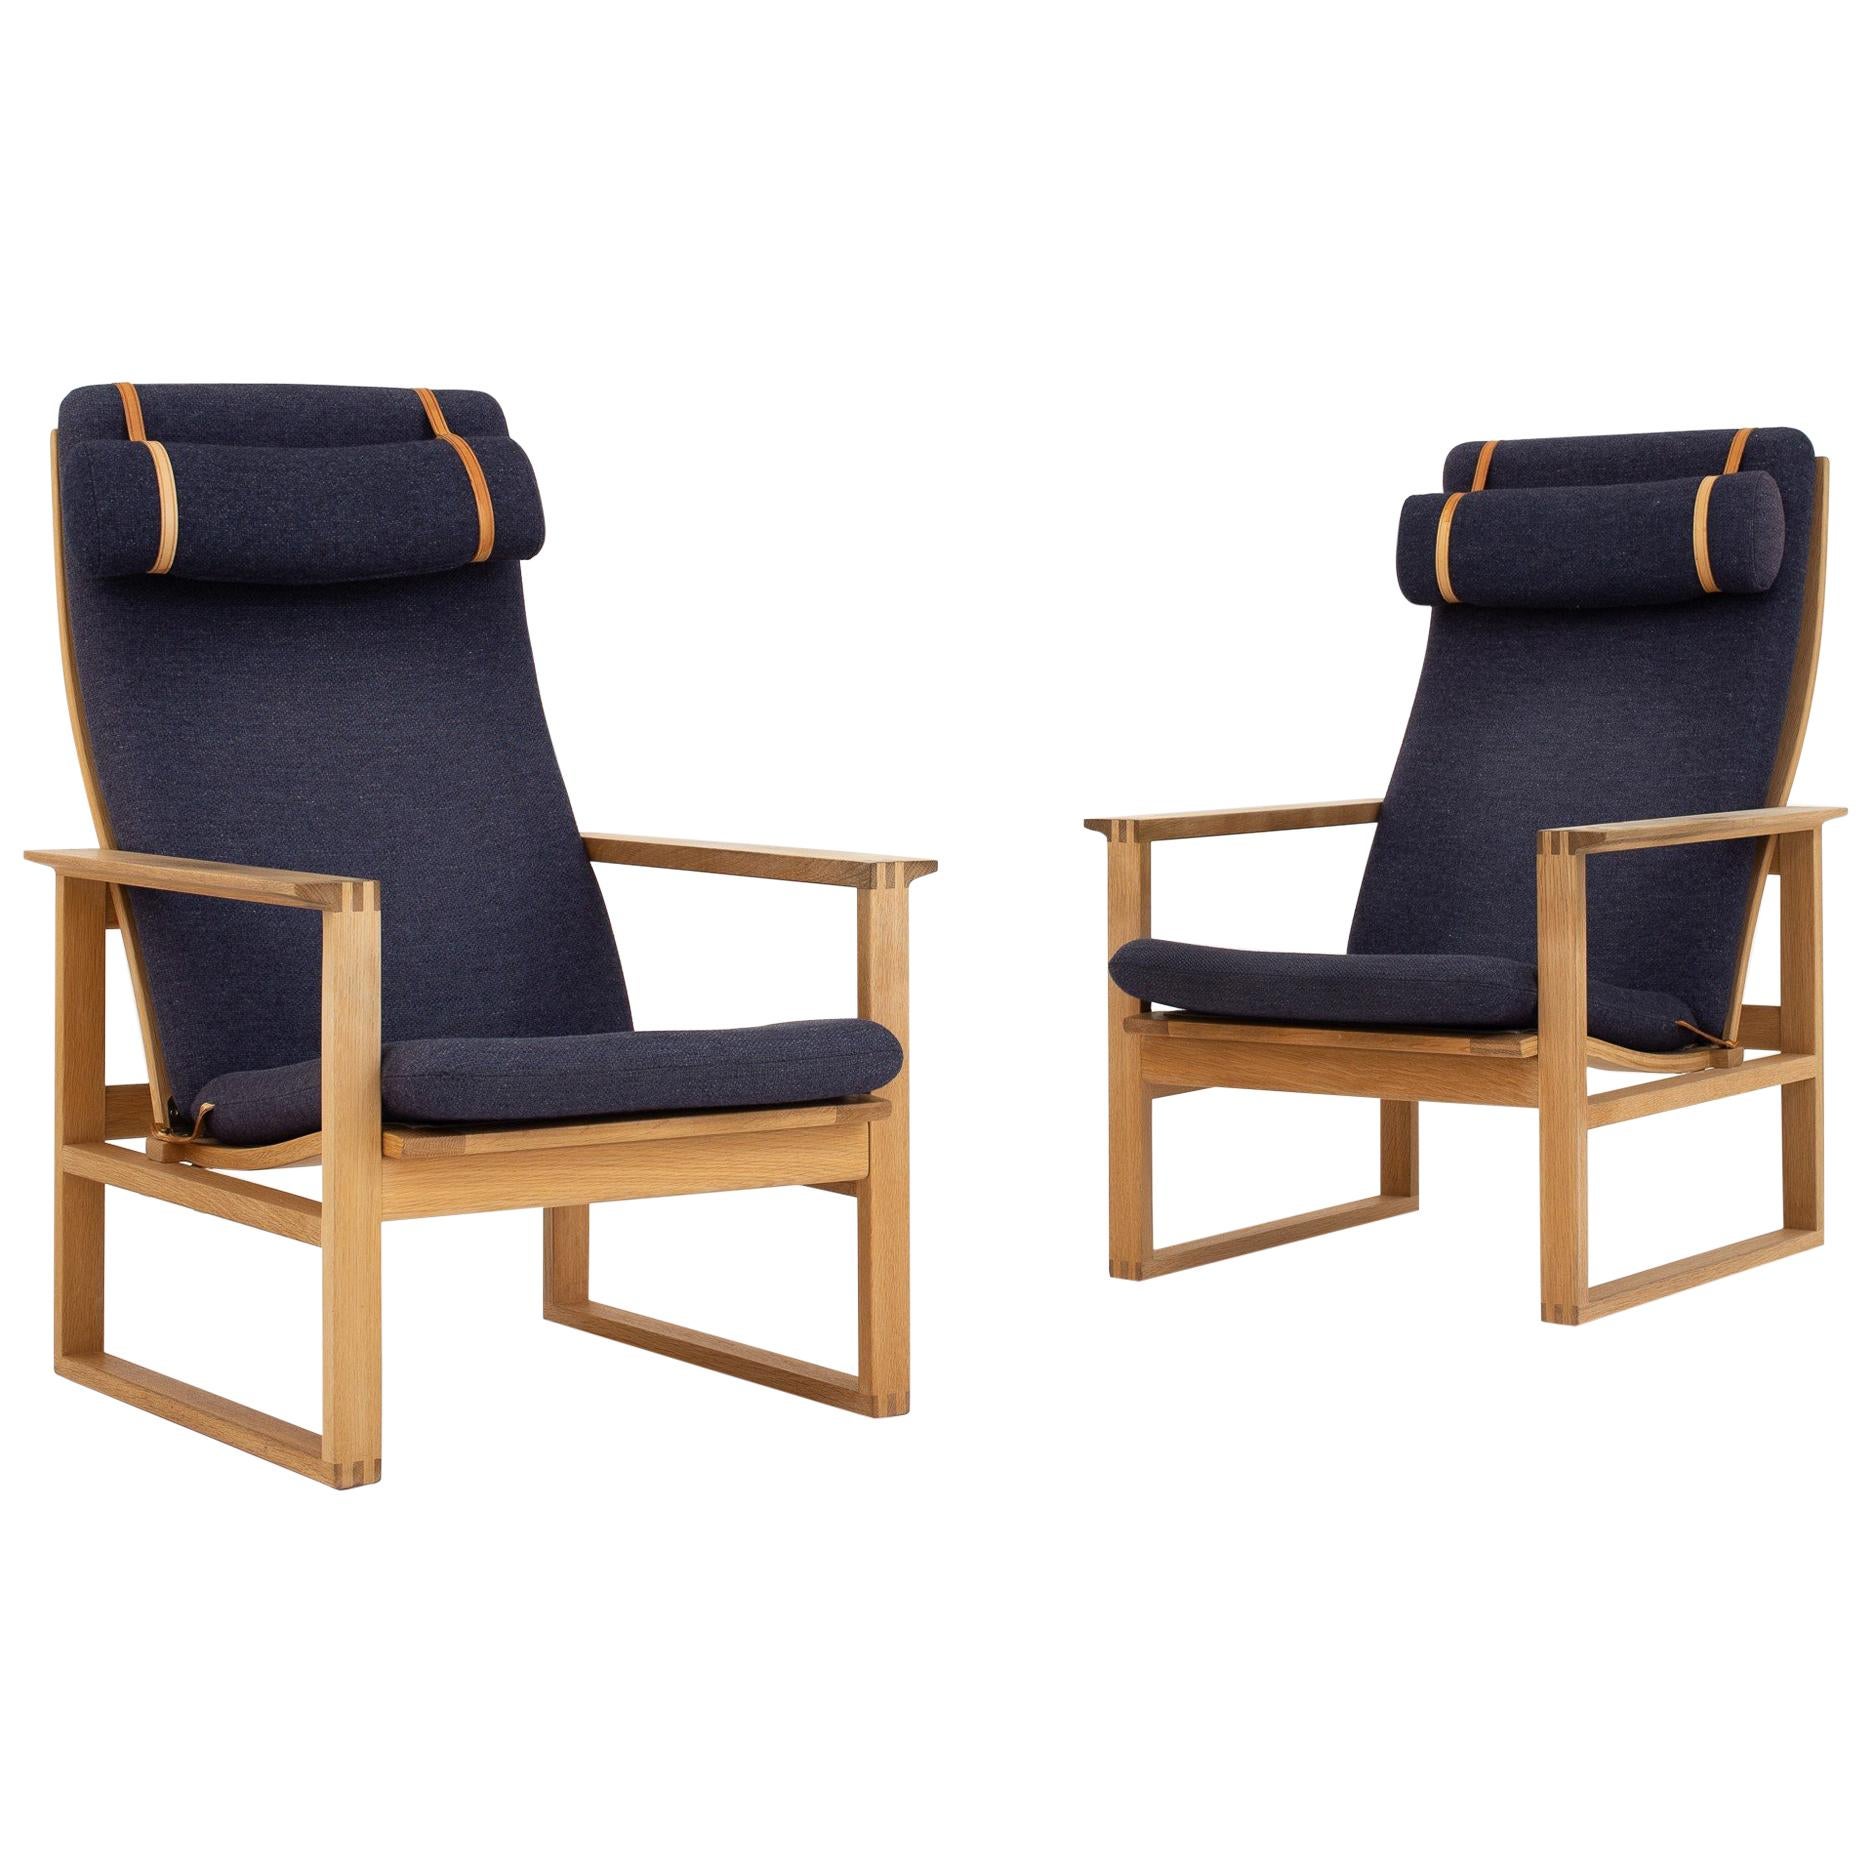 Pair of Lounge Chairs by Børge Mogensen